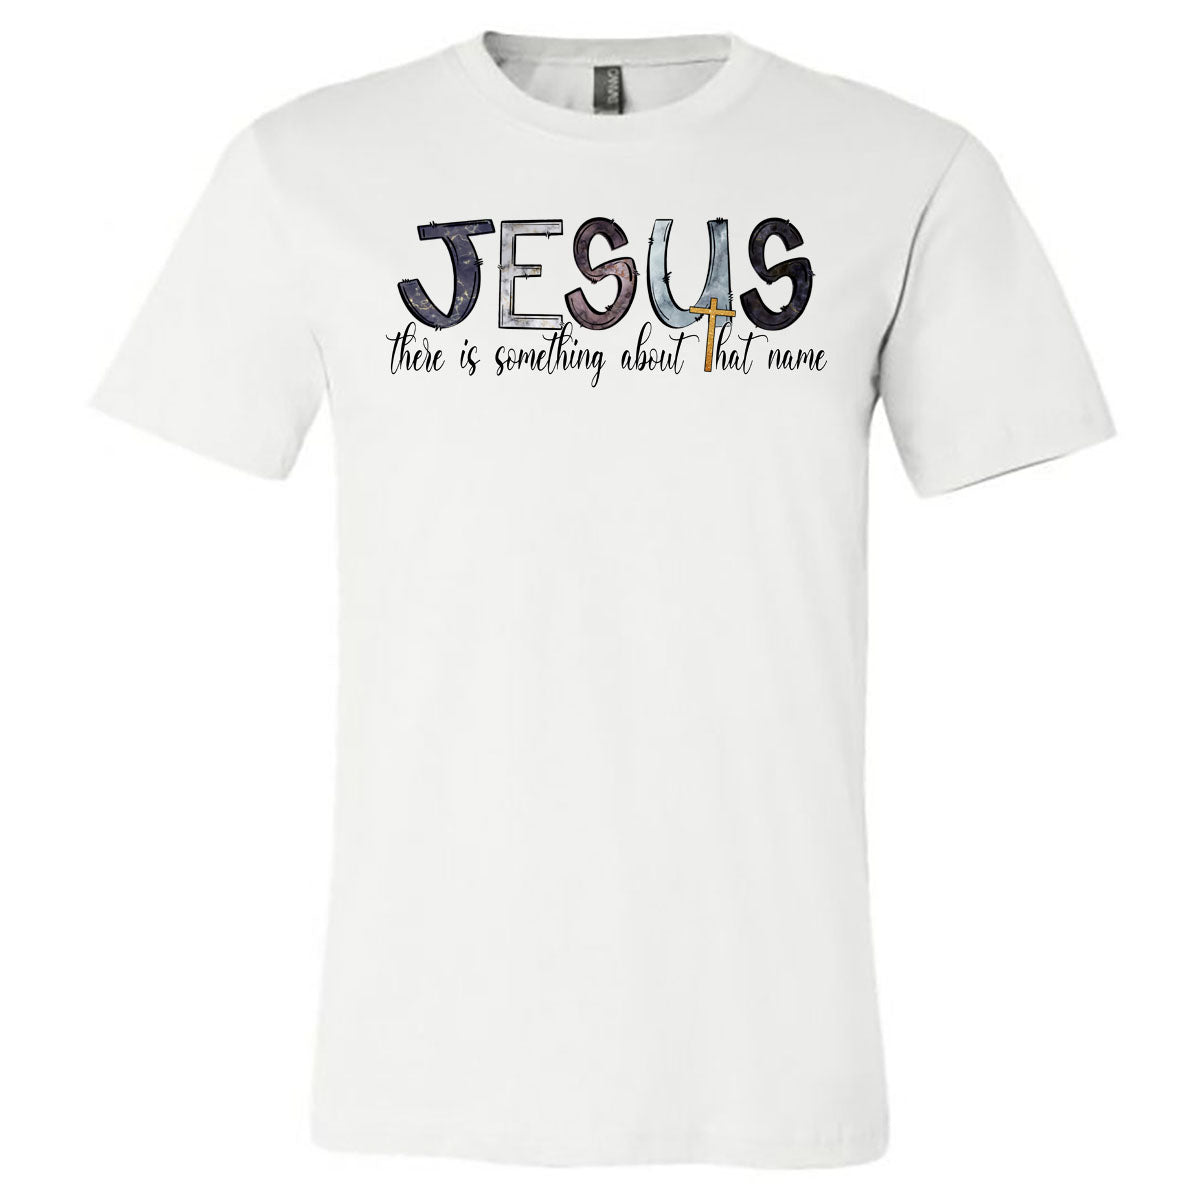 Jesus There Is Something About That Name - White Short Sleeve Tee - Southern Grace Creations